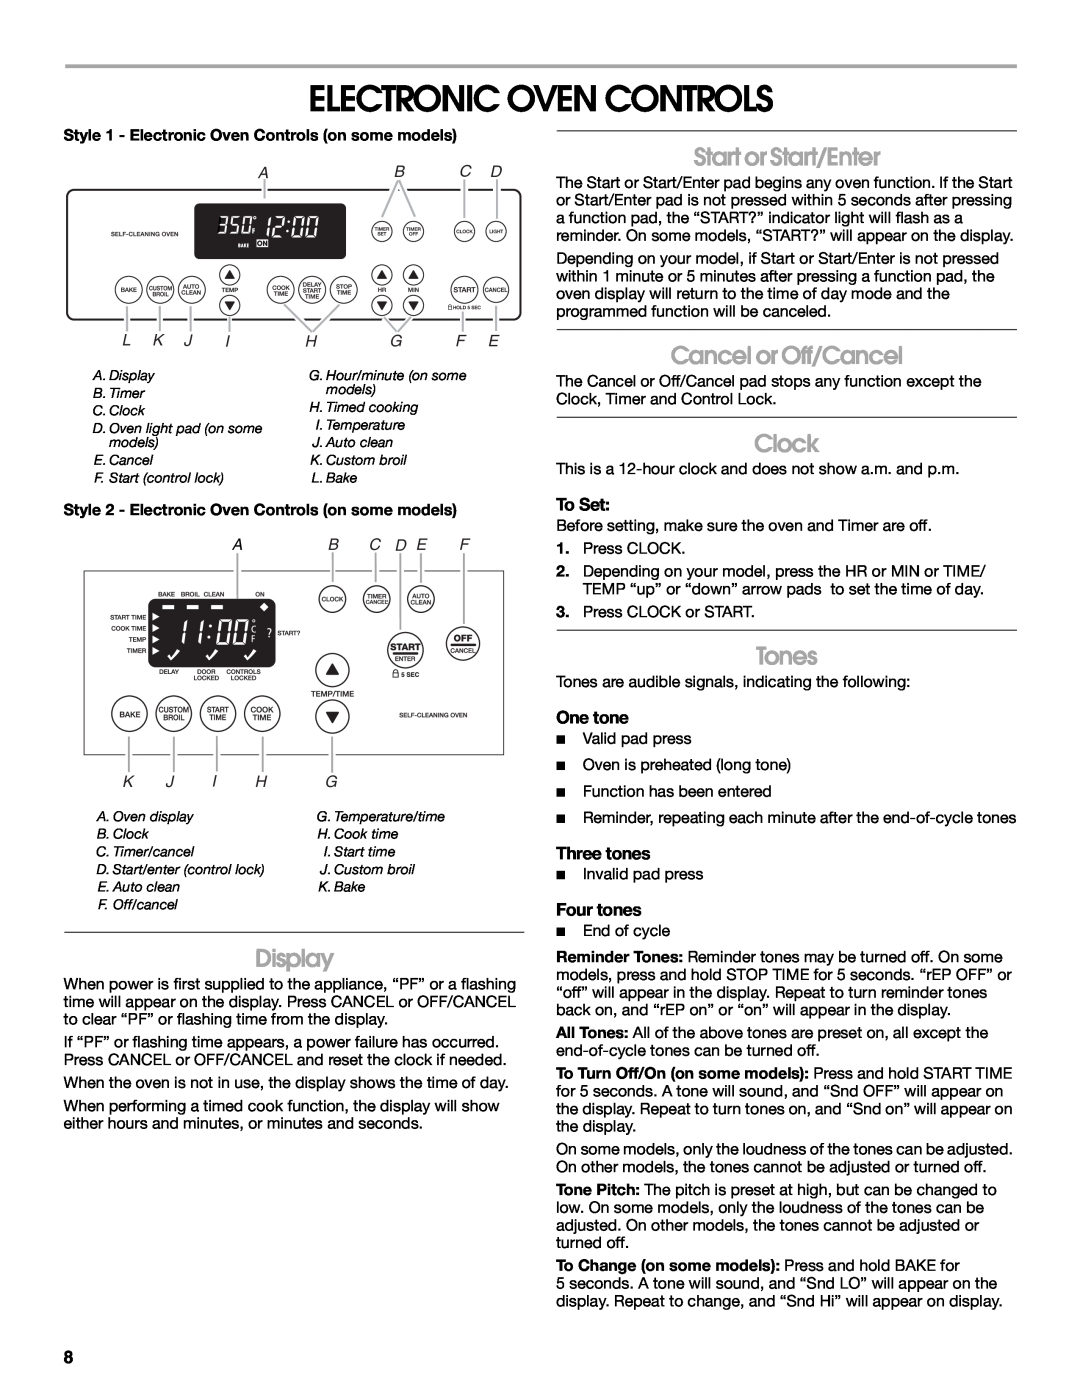 Whirlpool IGS365RS0 Electronic Oven Controls, Start or Start/Enter, Cancel or Off/Cancel, Clock, Display, Tones, To Set 